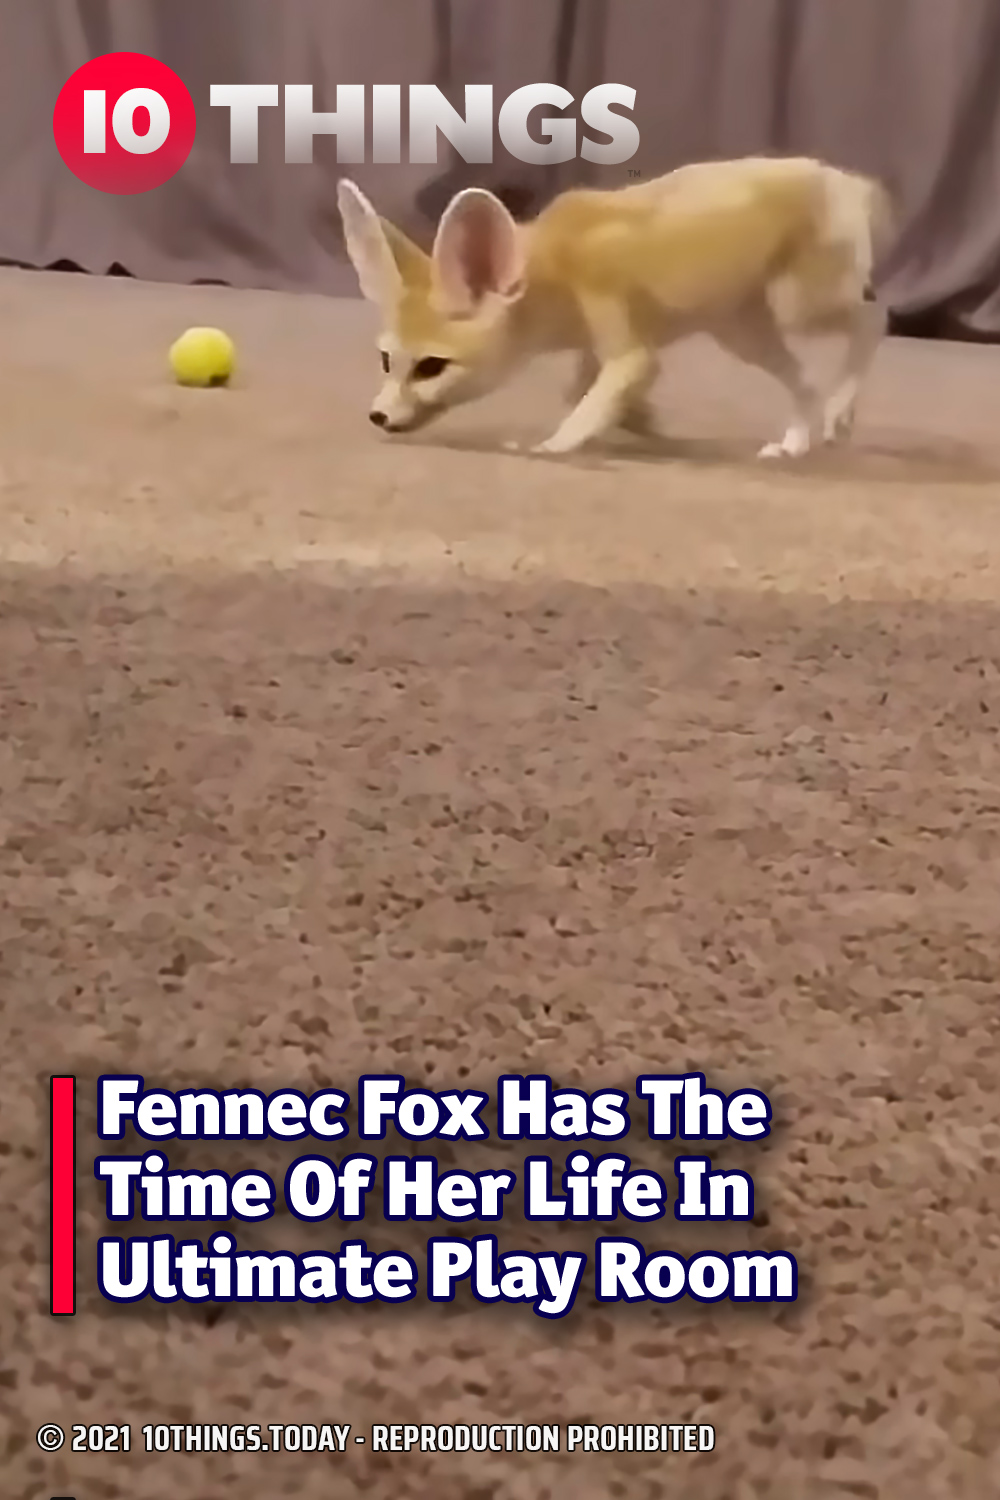 Fennec Fox Has The Time Of Her Life In Ultimate Play Room